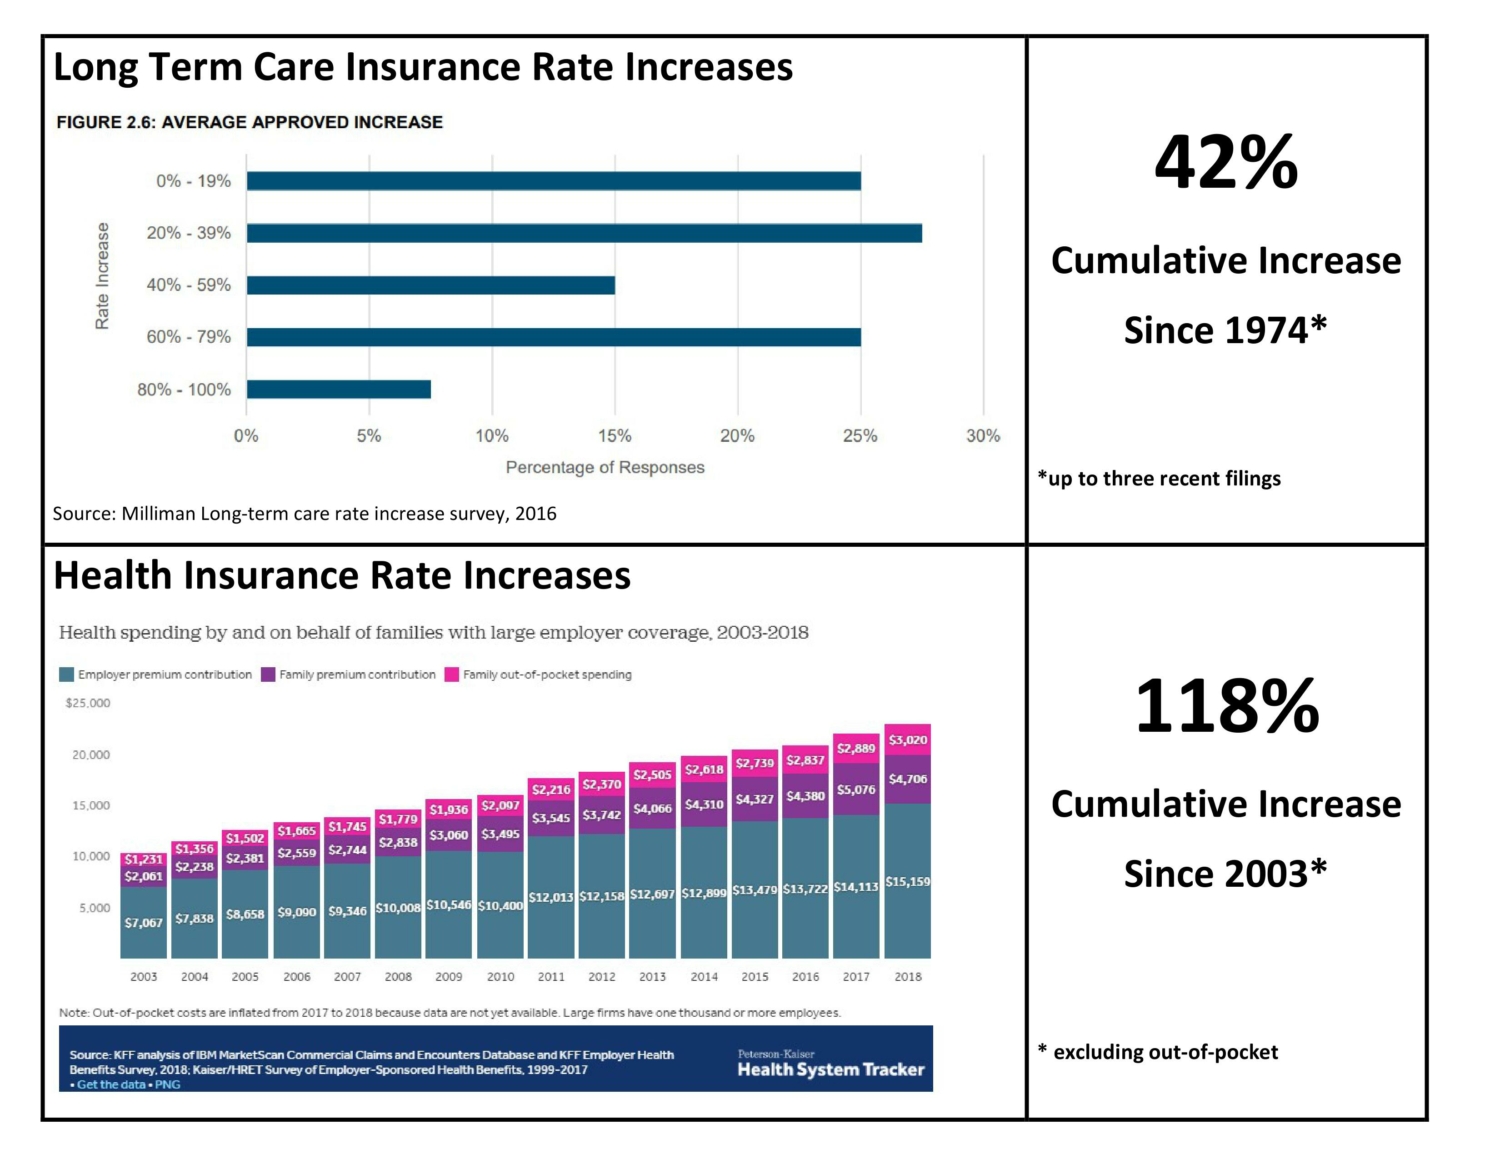 Long Term Care Insurance Rate Increases Versus Health Insurance Rate